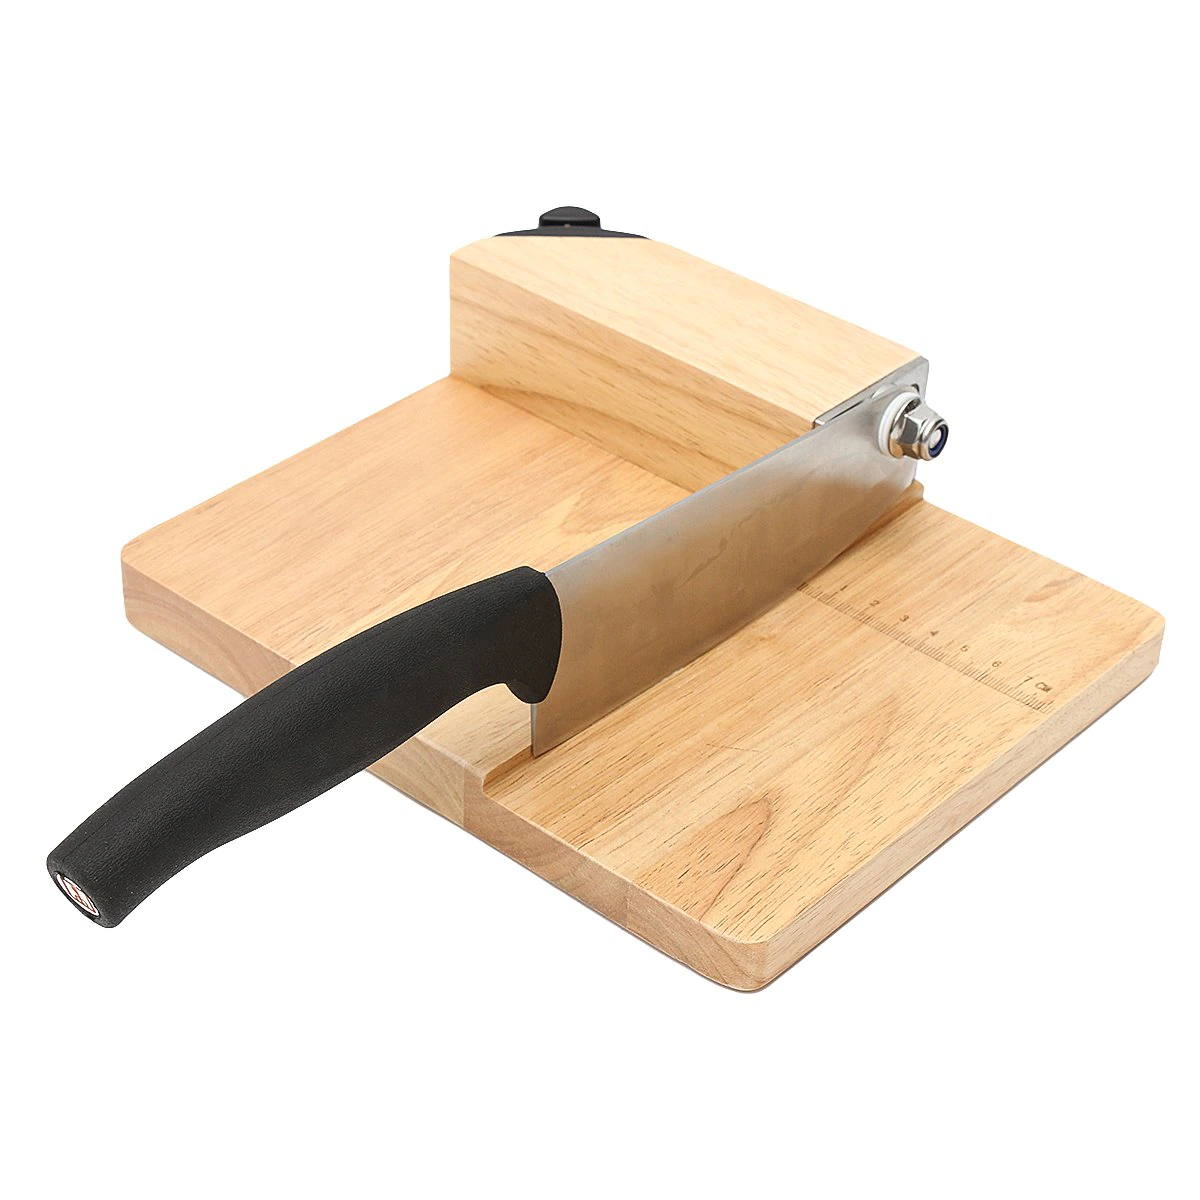 Cutter Jerky Slicer Knife Household Rice Cake Knife Meat Slicer Cutting Board Cooking Accessories kitchen tools